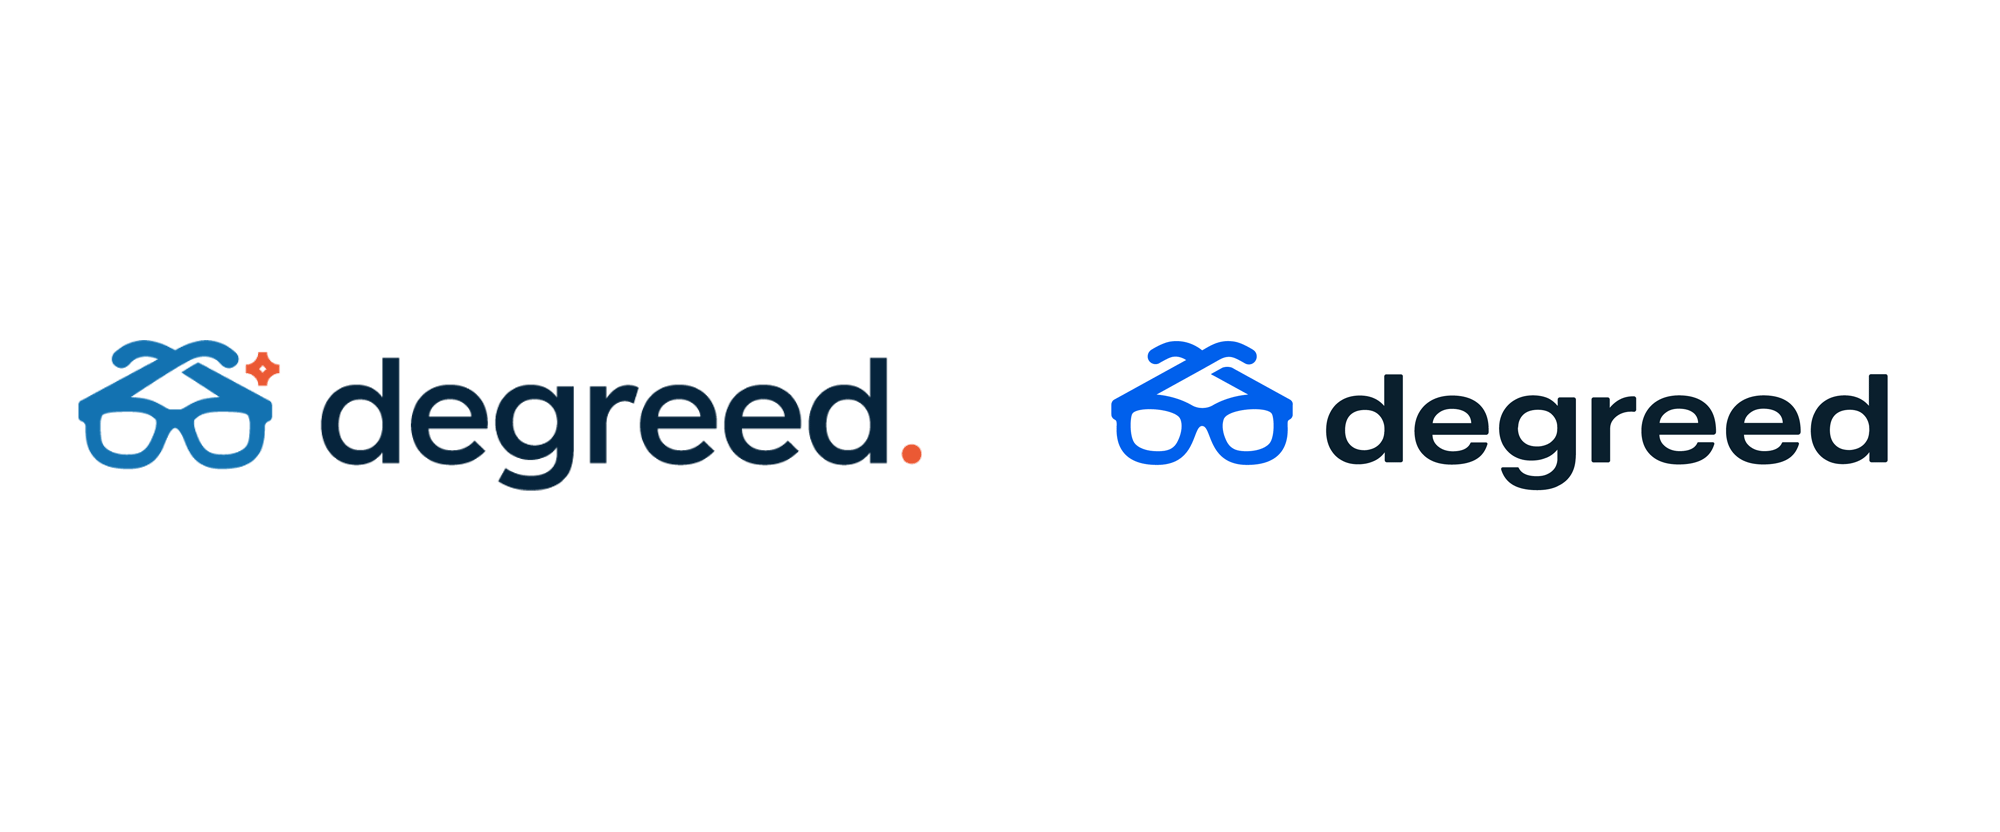 New Logo and Identity for Degreed done In-house